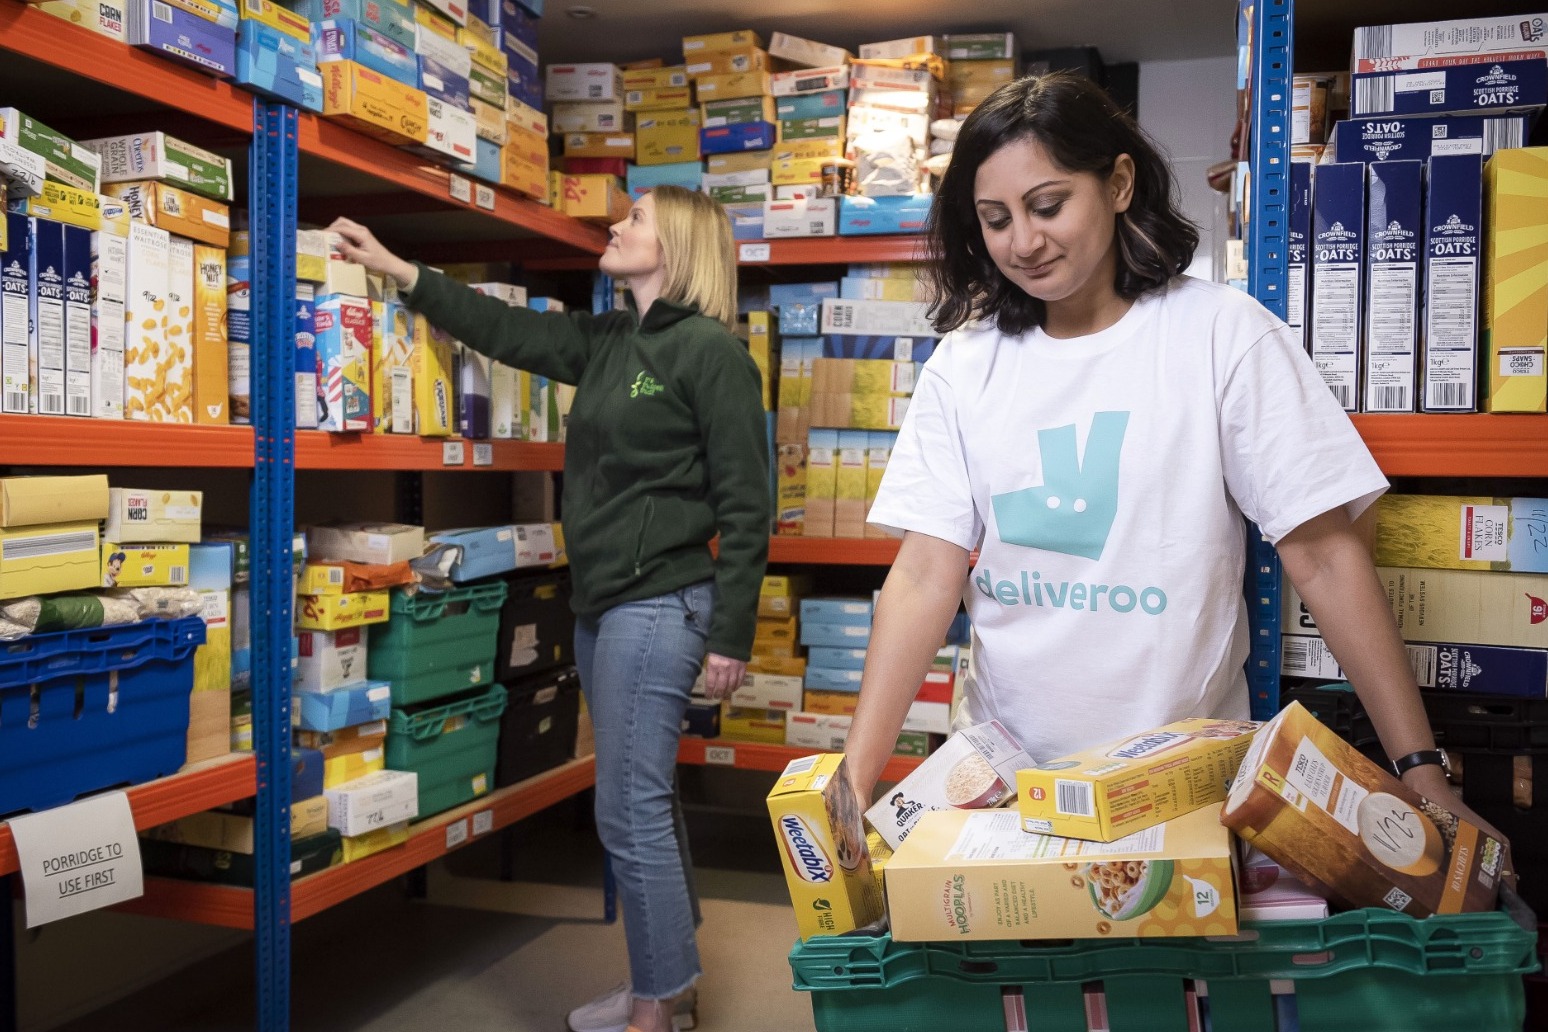 Nearly one in 10 parents ‘very likely’ to need food bank, survey finds 